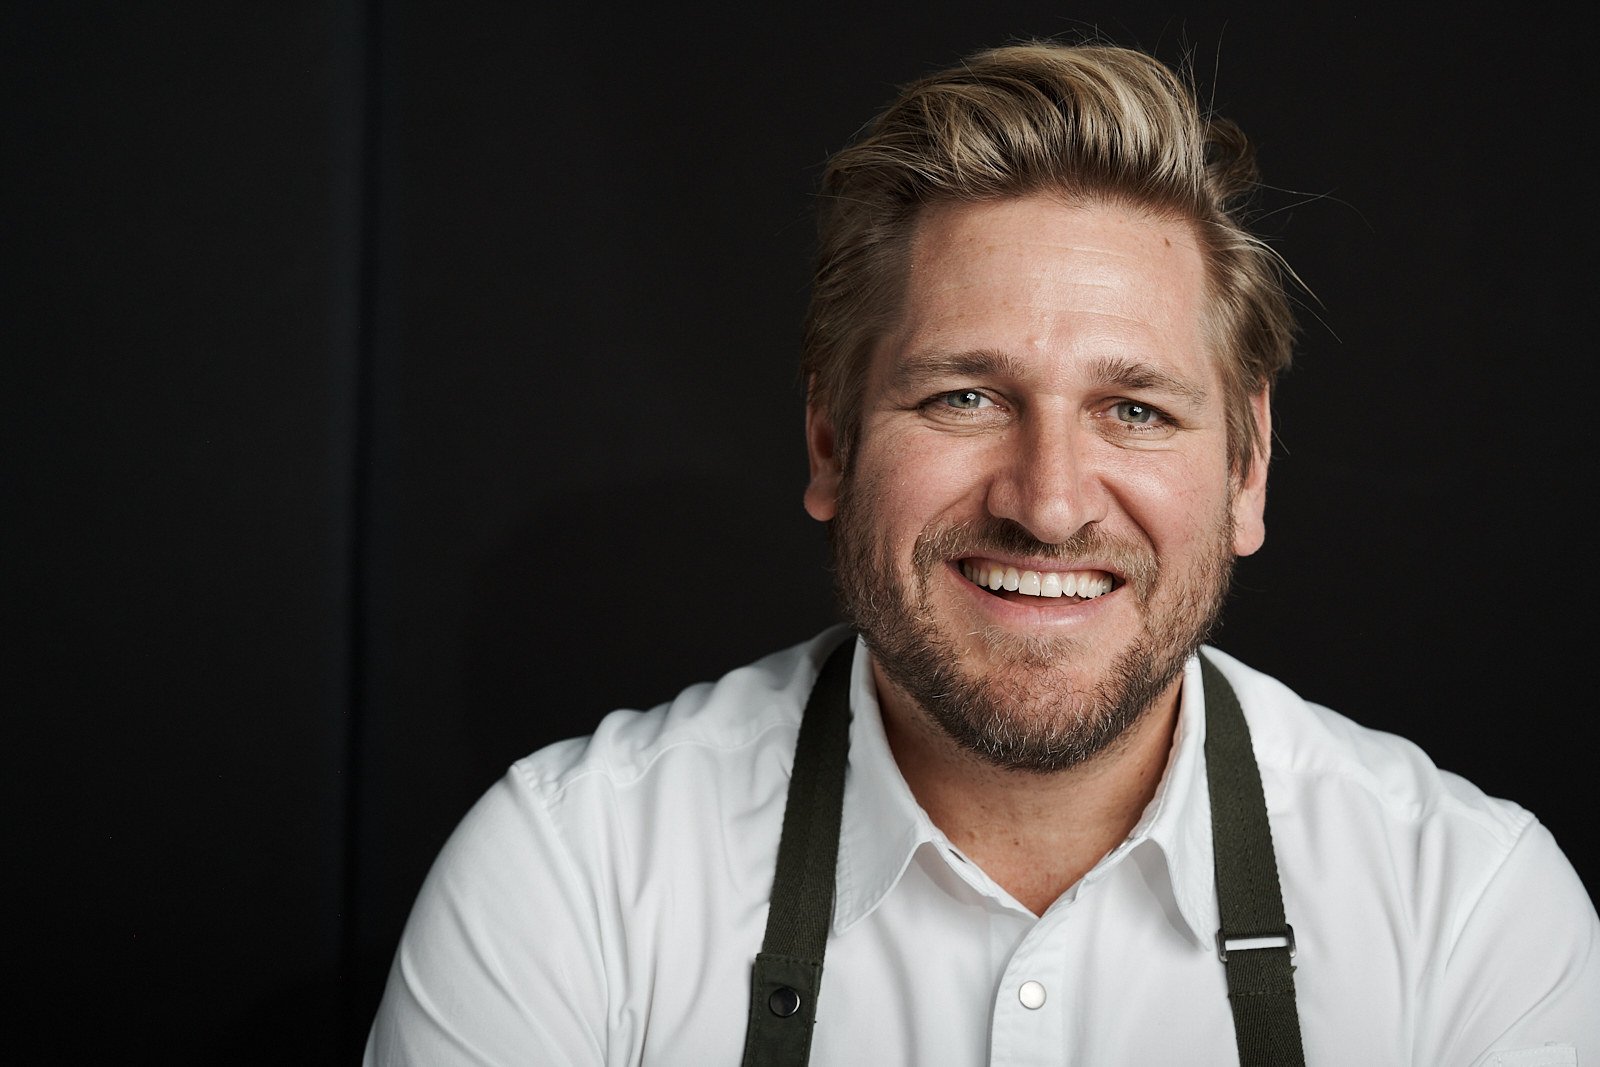 Celebrity chef Curtis Stone, who was recently in Hong Kong for filming on a third season of his show on America’s PBS, “Field Trip with Curtis Stone”. Photo: Ray Kachatorian